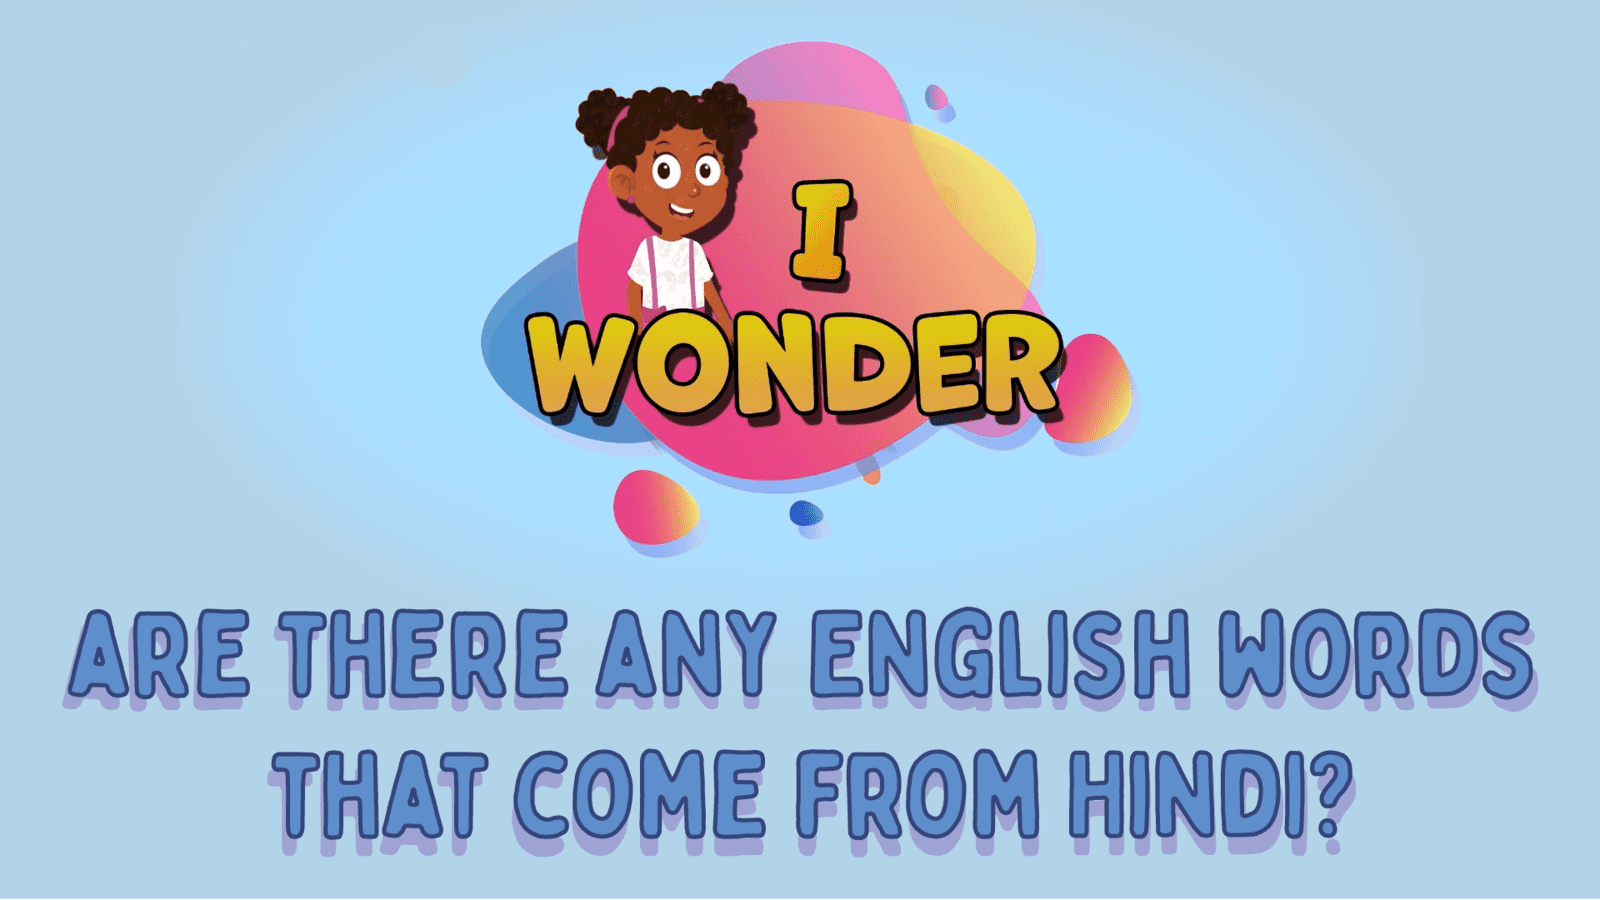 Are There Any English Words That Come From Hindi?